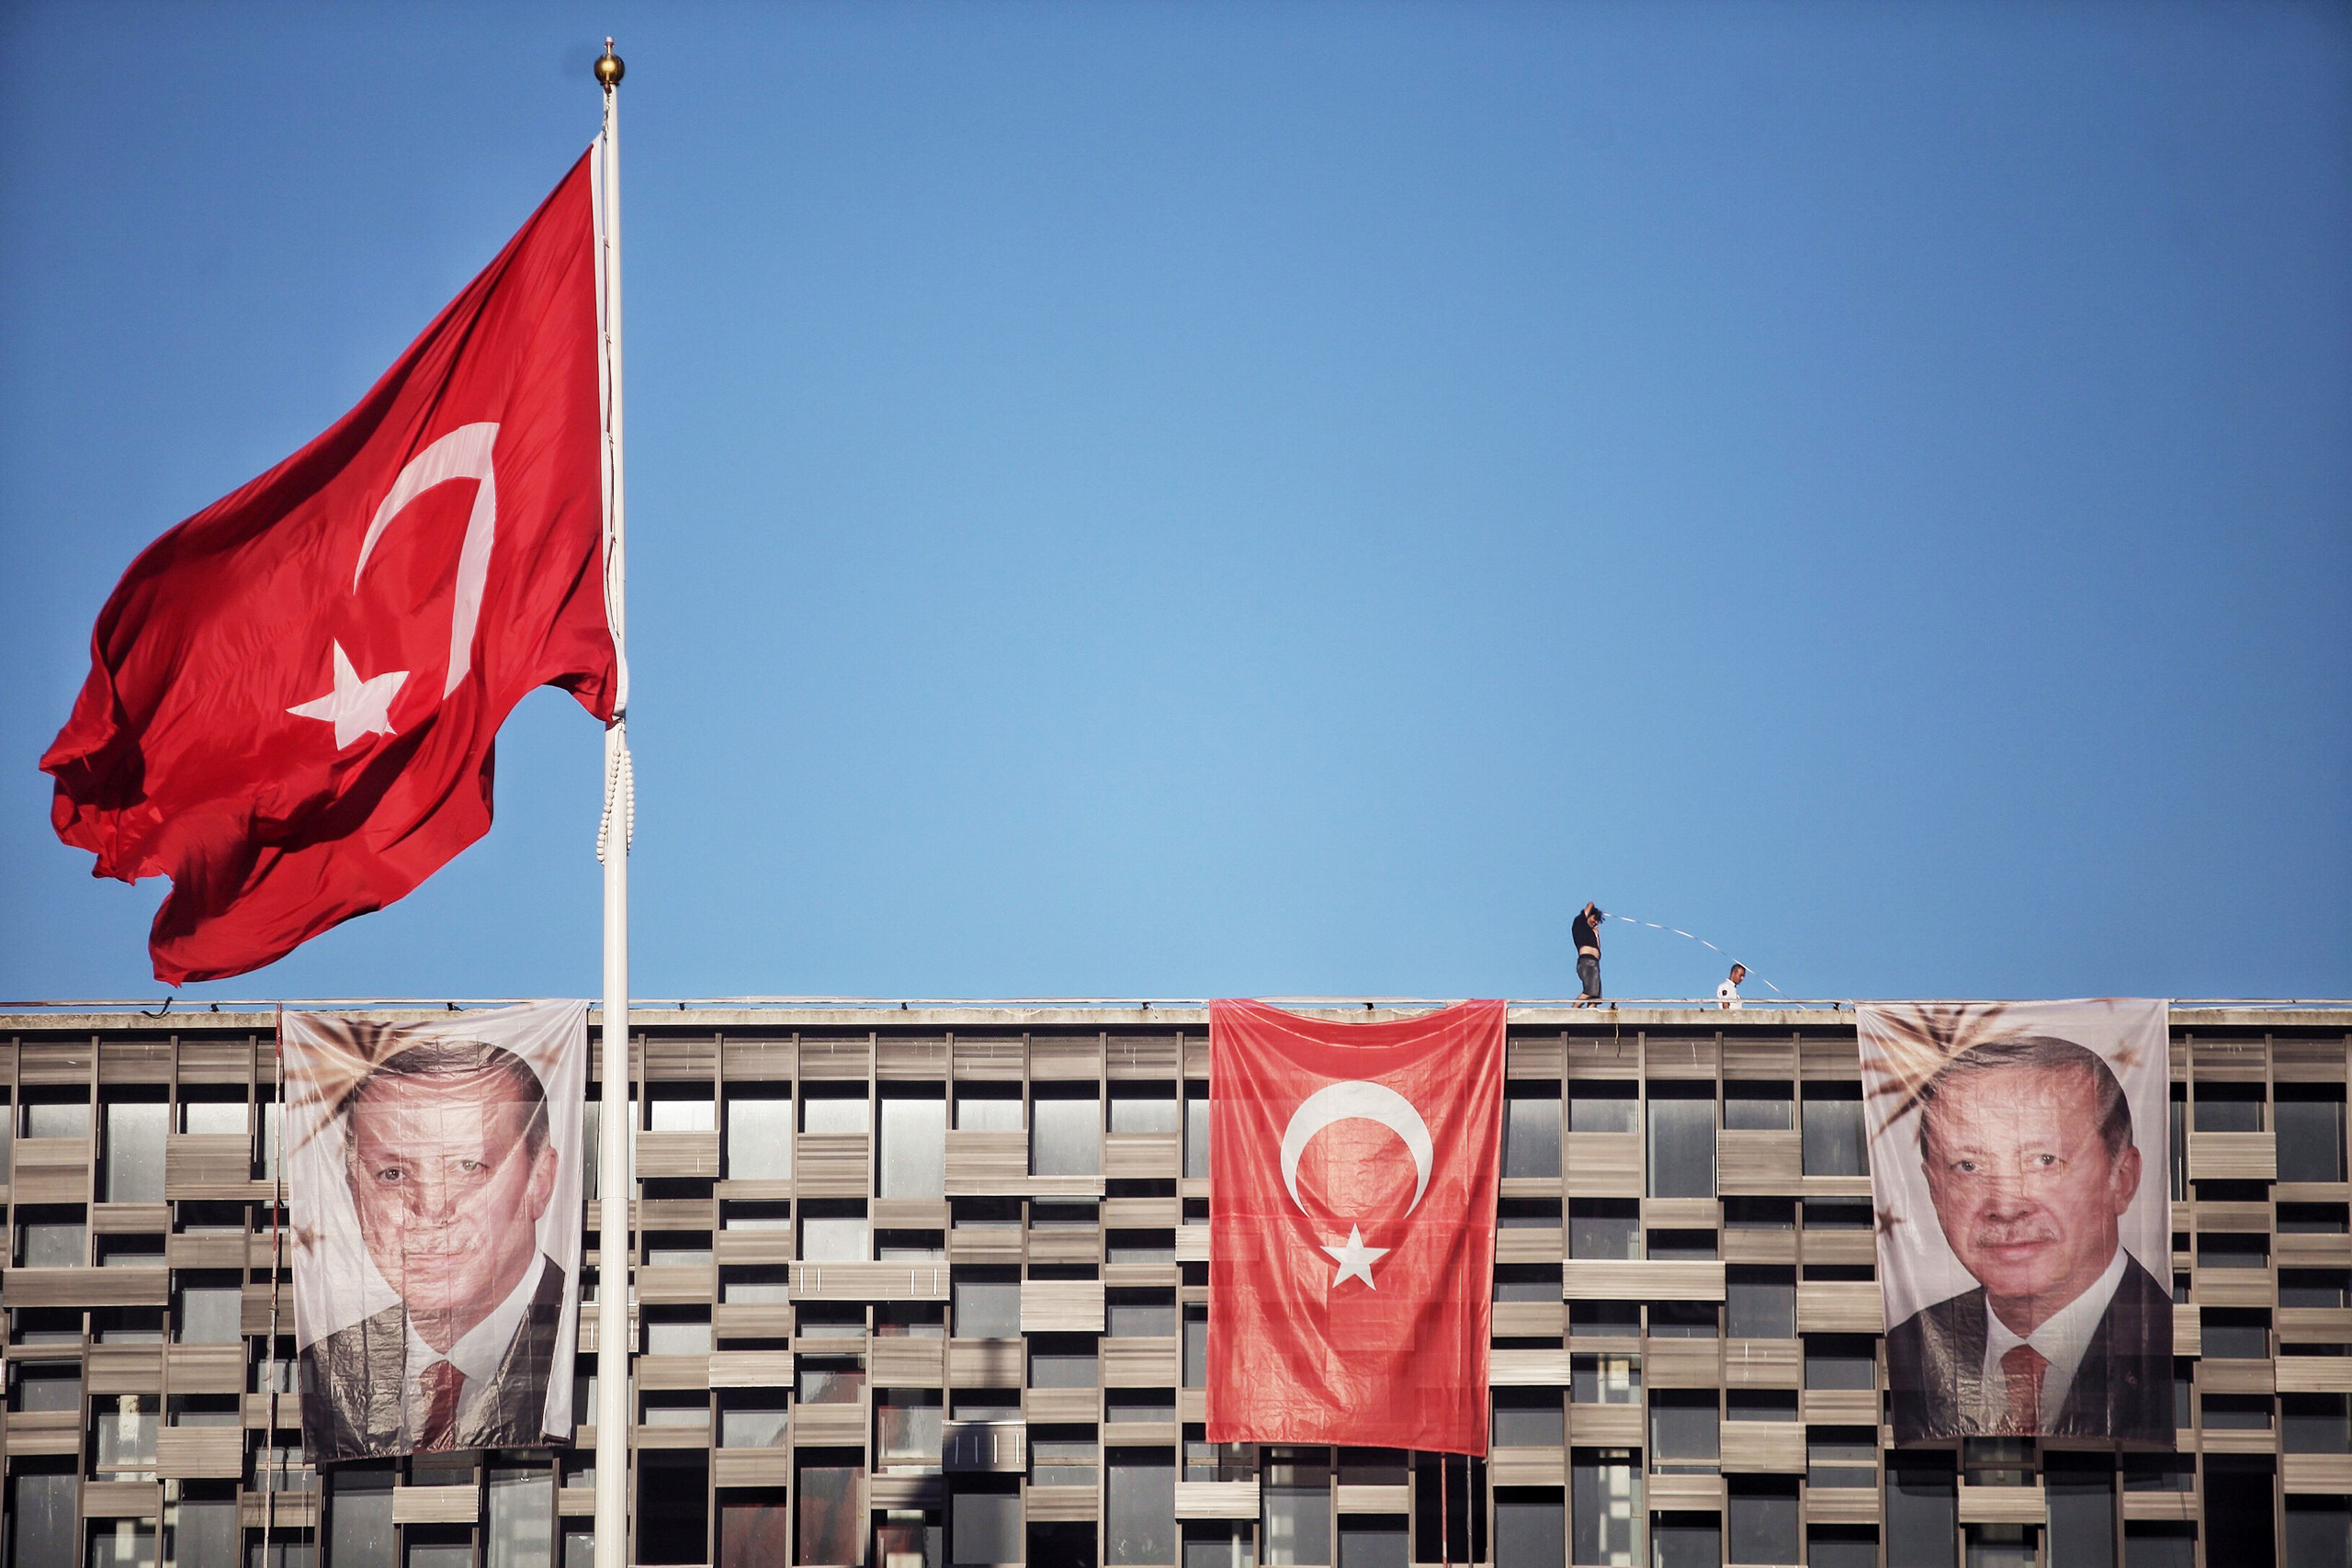 Posters of Turkey's President Recep Tayyip Erdogan and a Turkish flag hangs on Ataturk Cultural Center at Istanbul's central Taksim on July 19, 2016. (Kursat Bayhan—Getty Images)